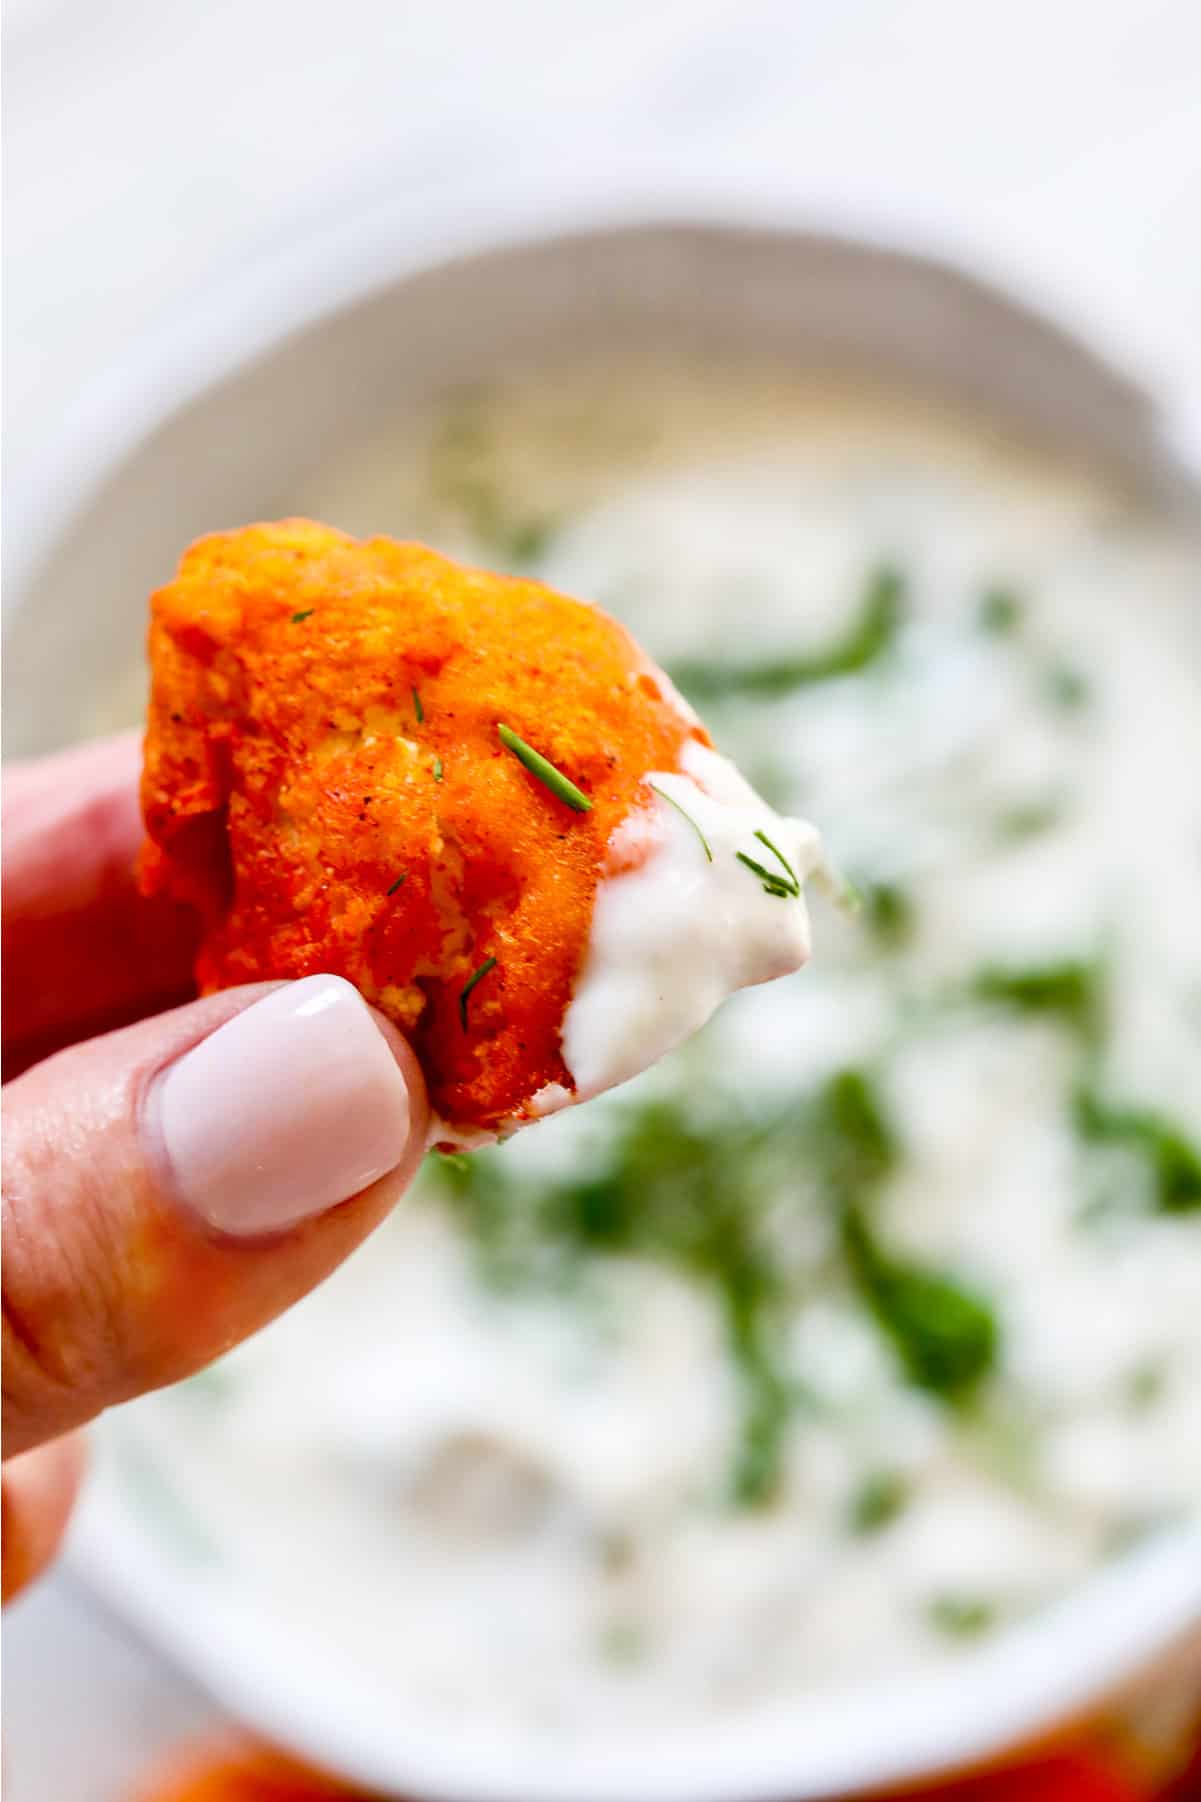 A lady holding a piece of buffalo cauliflower "wing" over a bowl of ranch dip in the background.